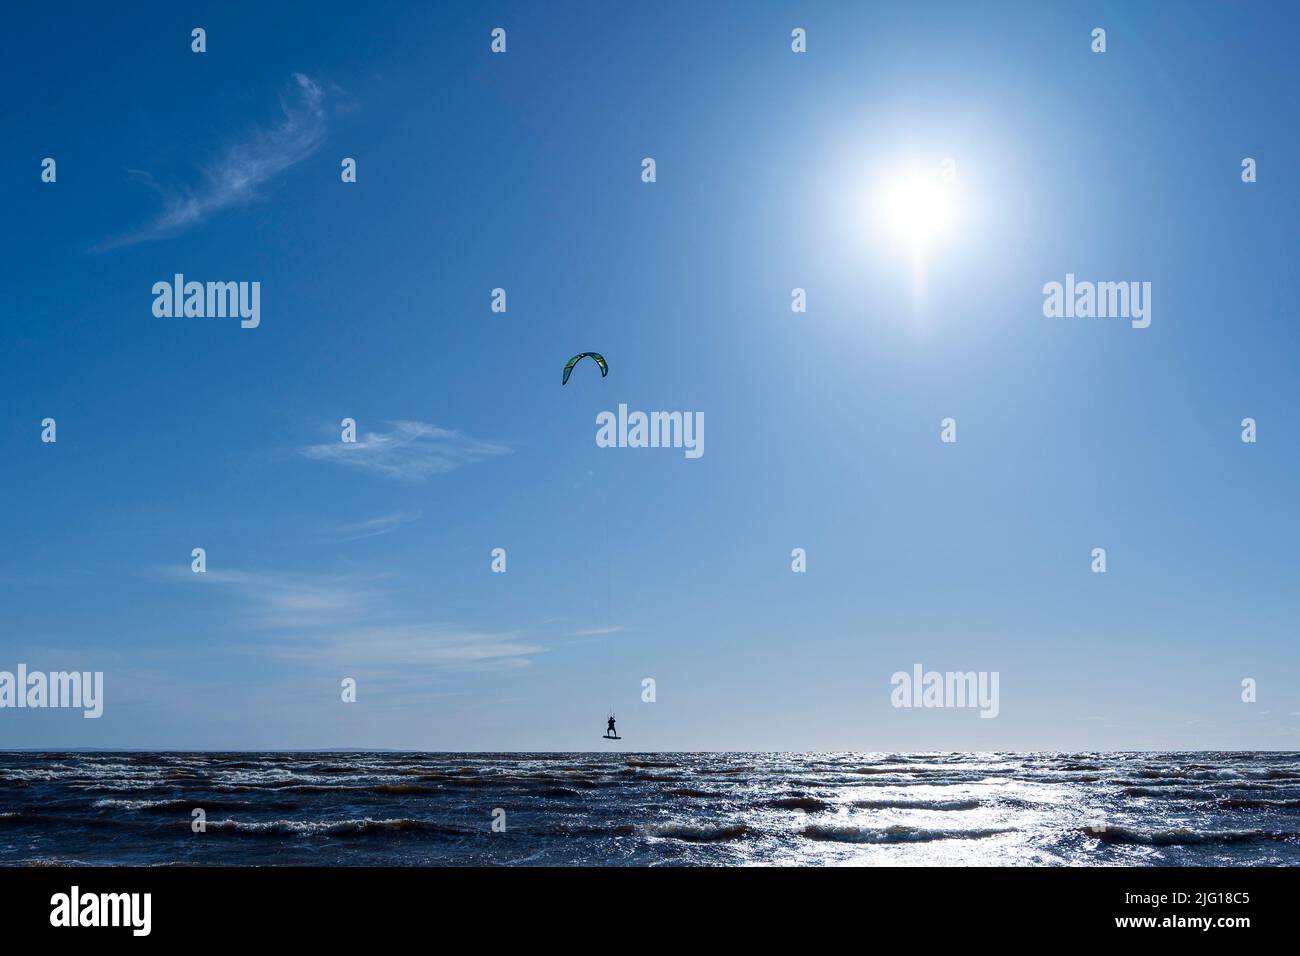 Kitesurfing at sea while performing tricks. freedom, strength, dreams. Stock Photo